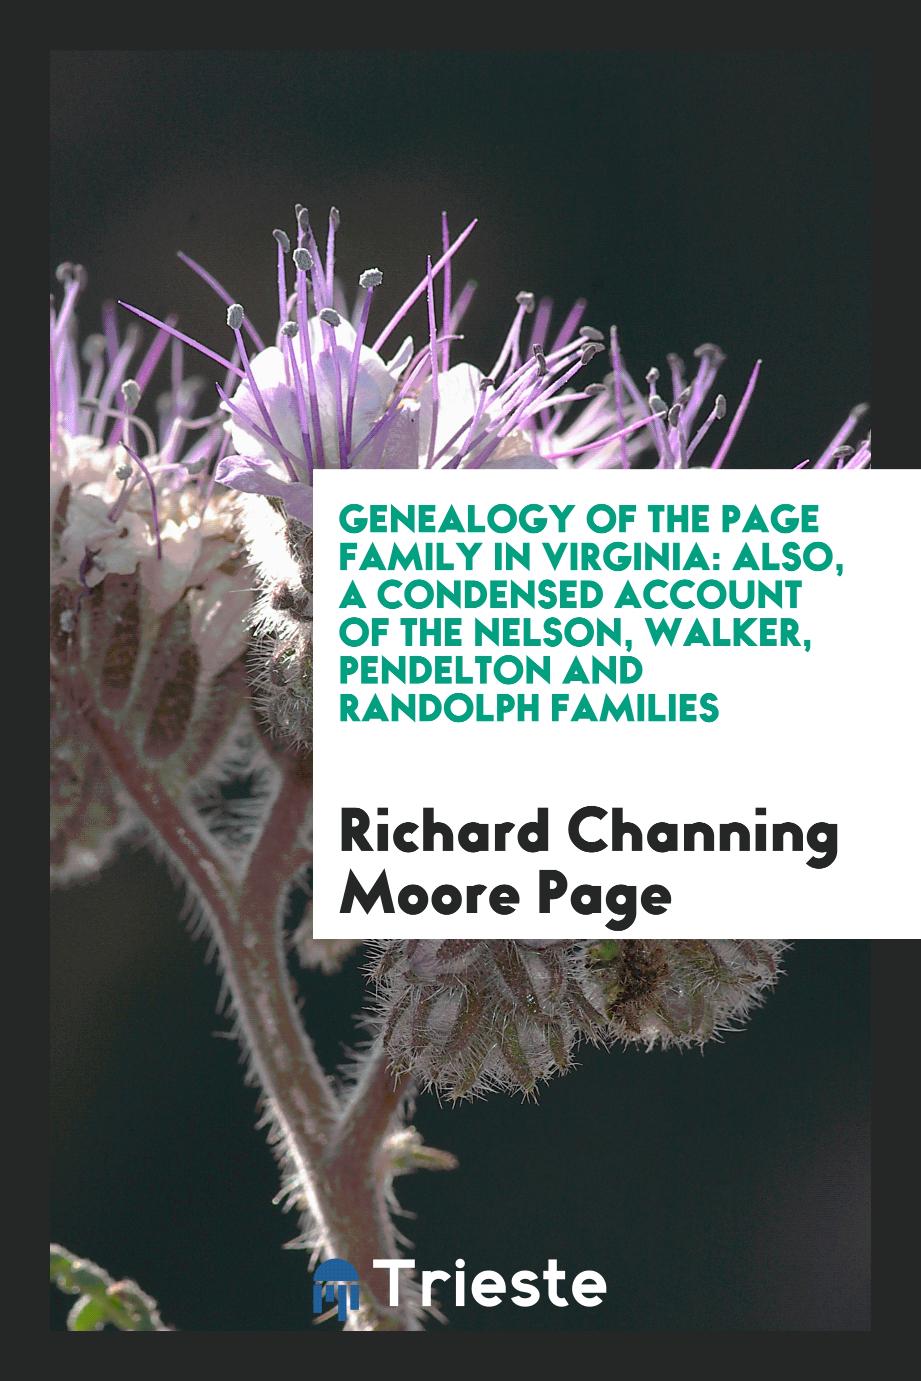 Genealogy of the Page Family in Virginia: Also, a Condensed Account of the Nelson, Walker, Pendelton and Randolph Families